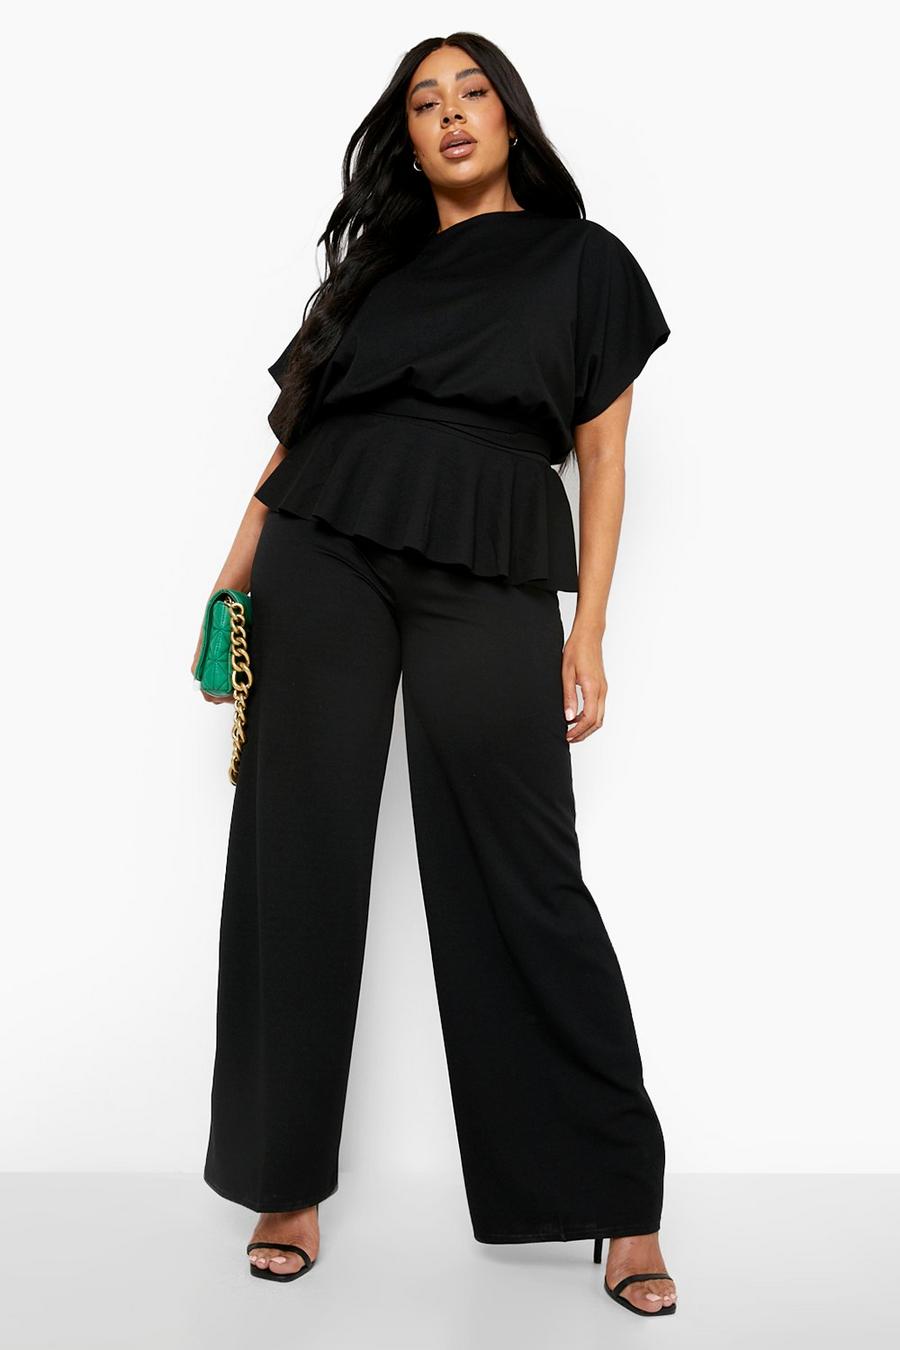 Black Plus Peplum Tie And Wide Leg Pants Two-Piece image number 1